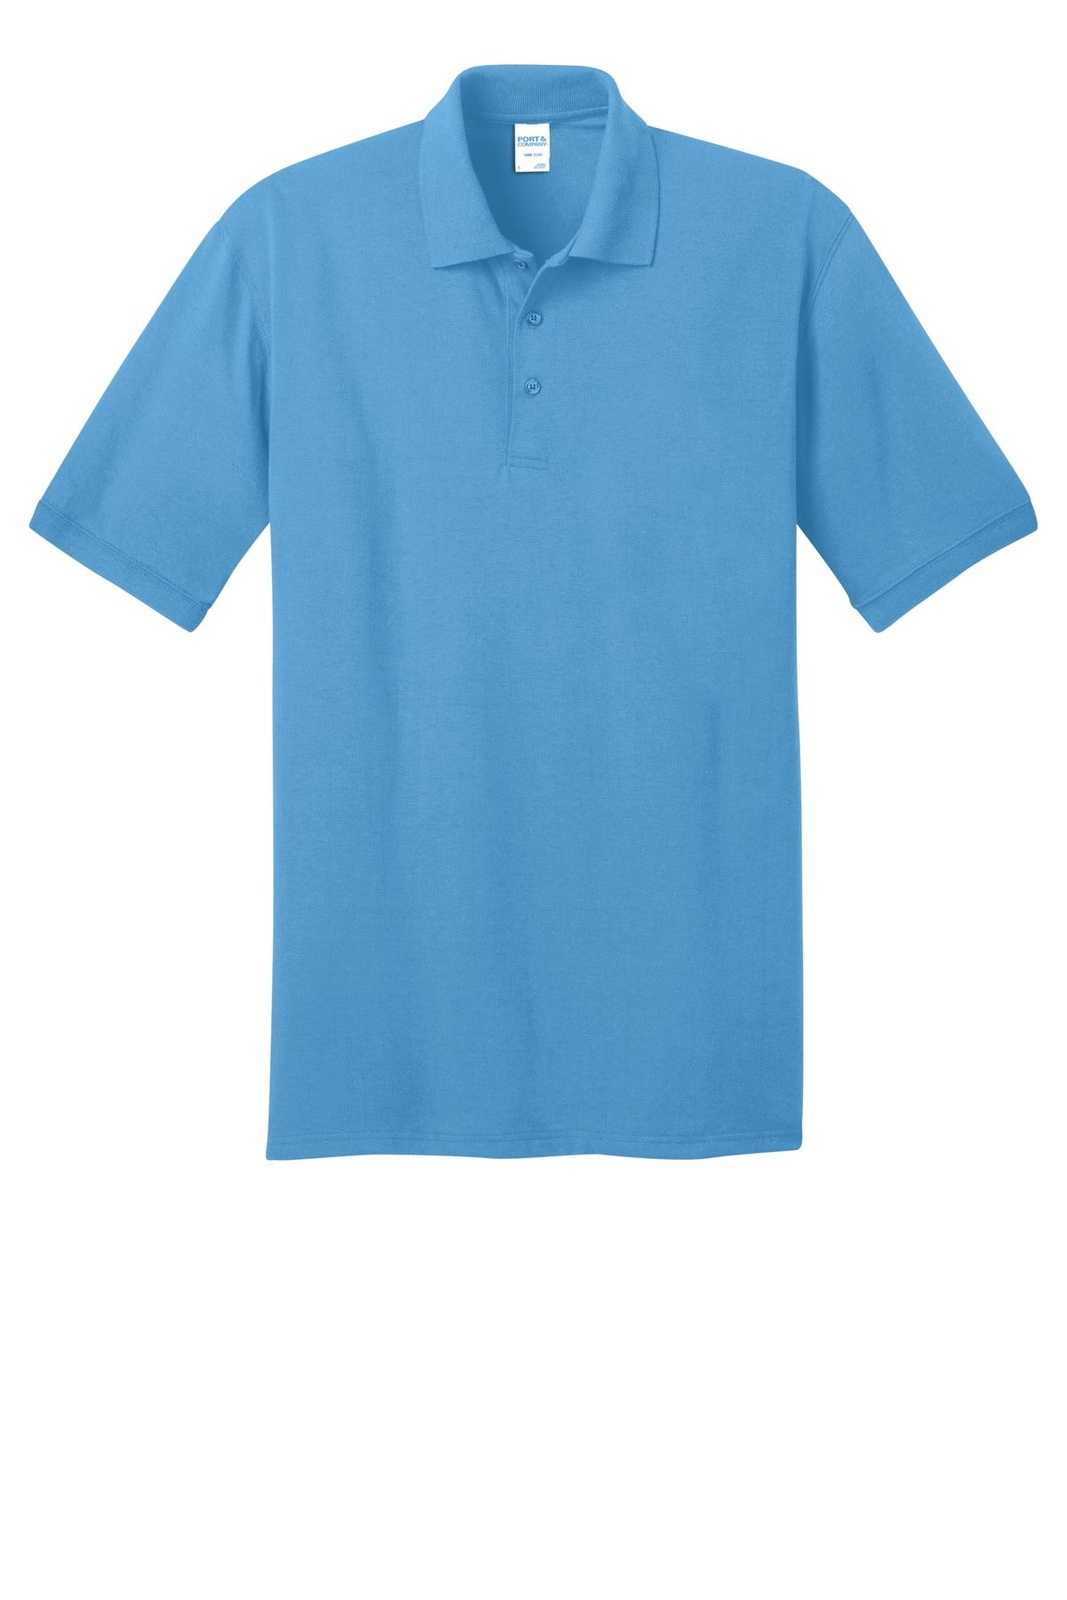 Port &amp; Company KP55T Tall Core Blend Jersey Knit Polo - Aquatic Blue - HIT a Double - 3